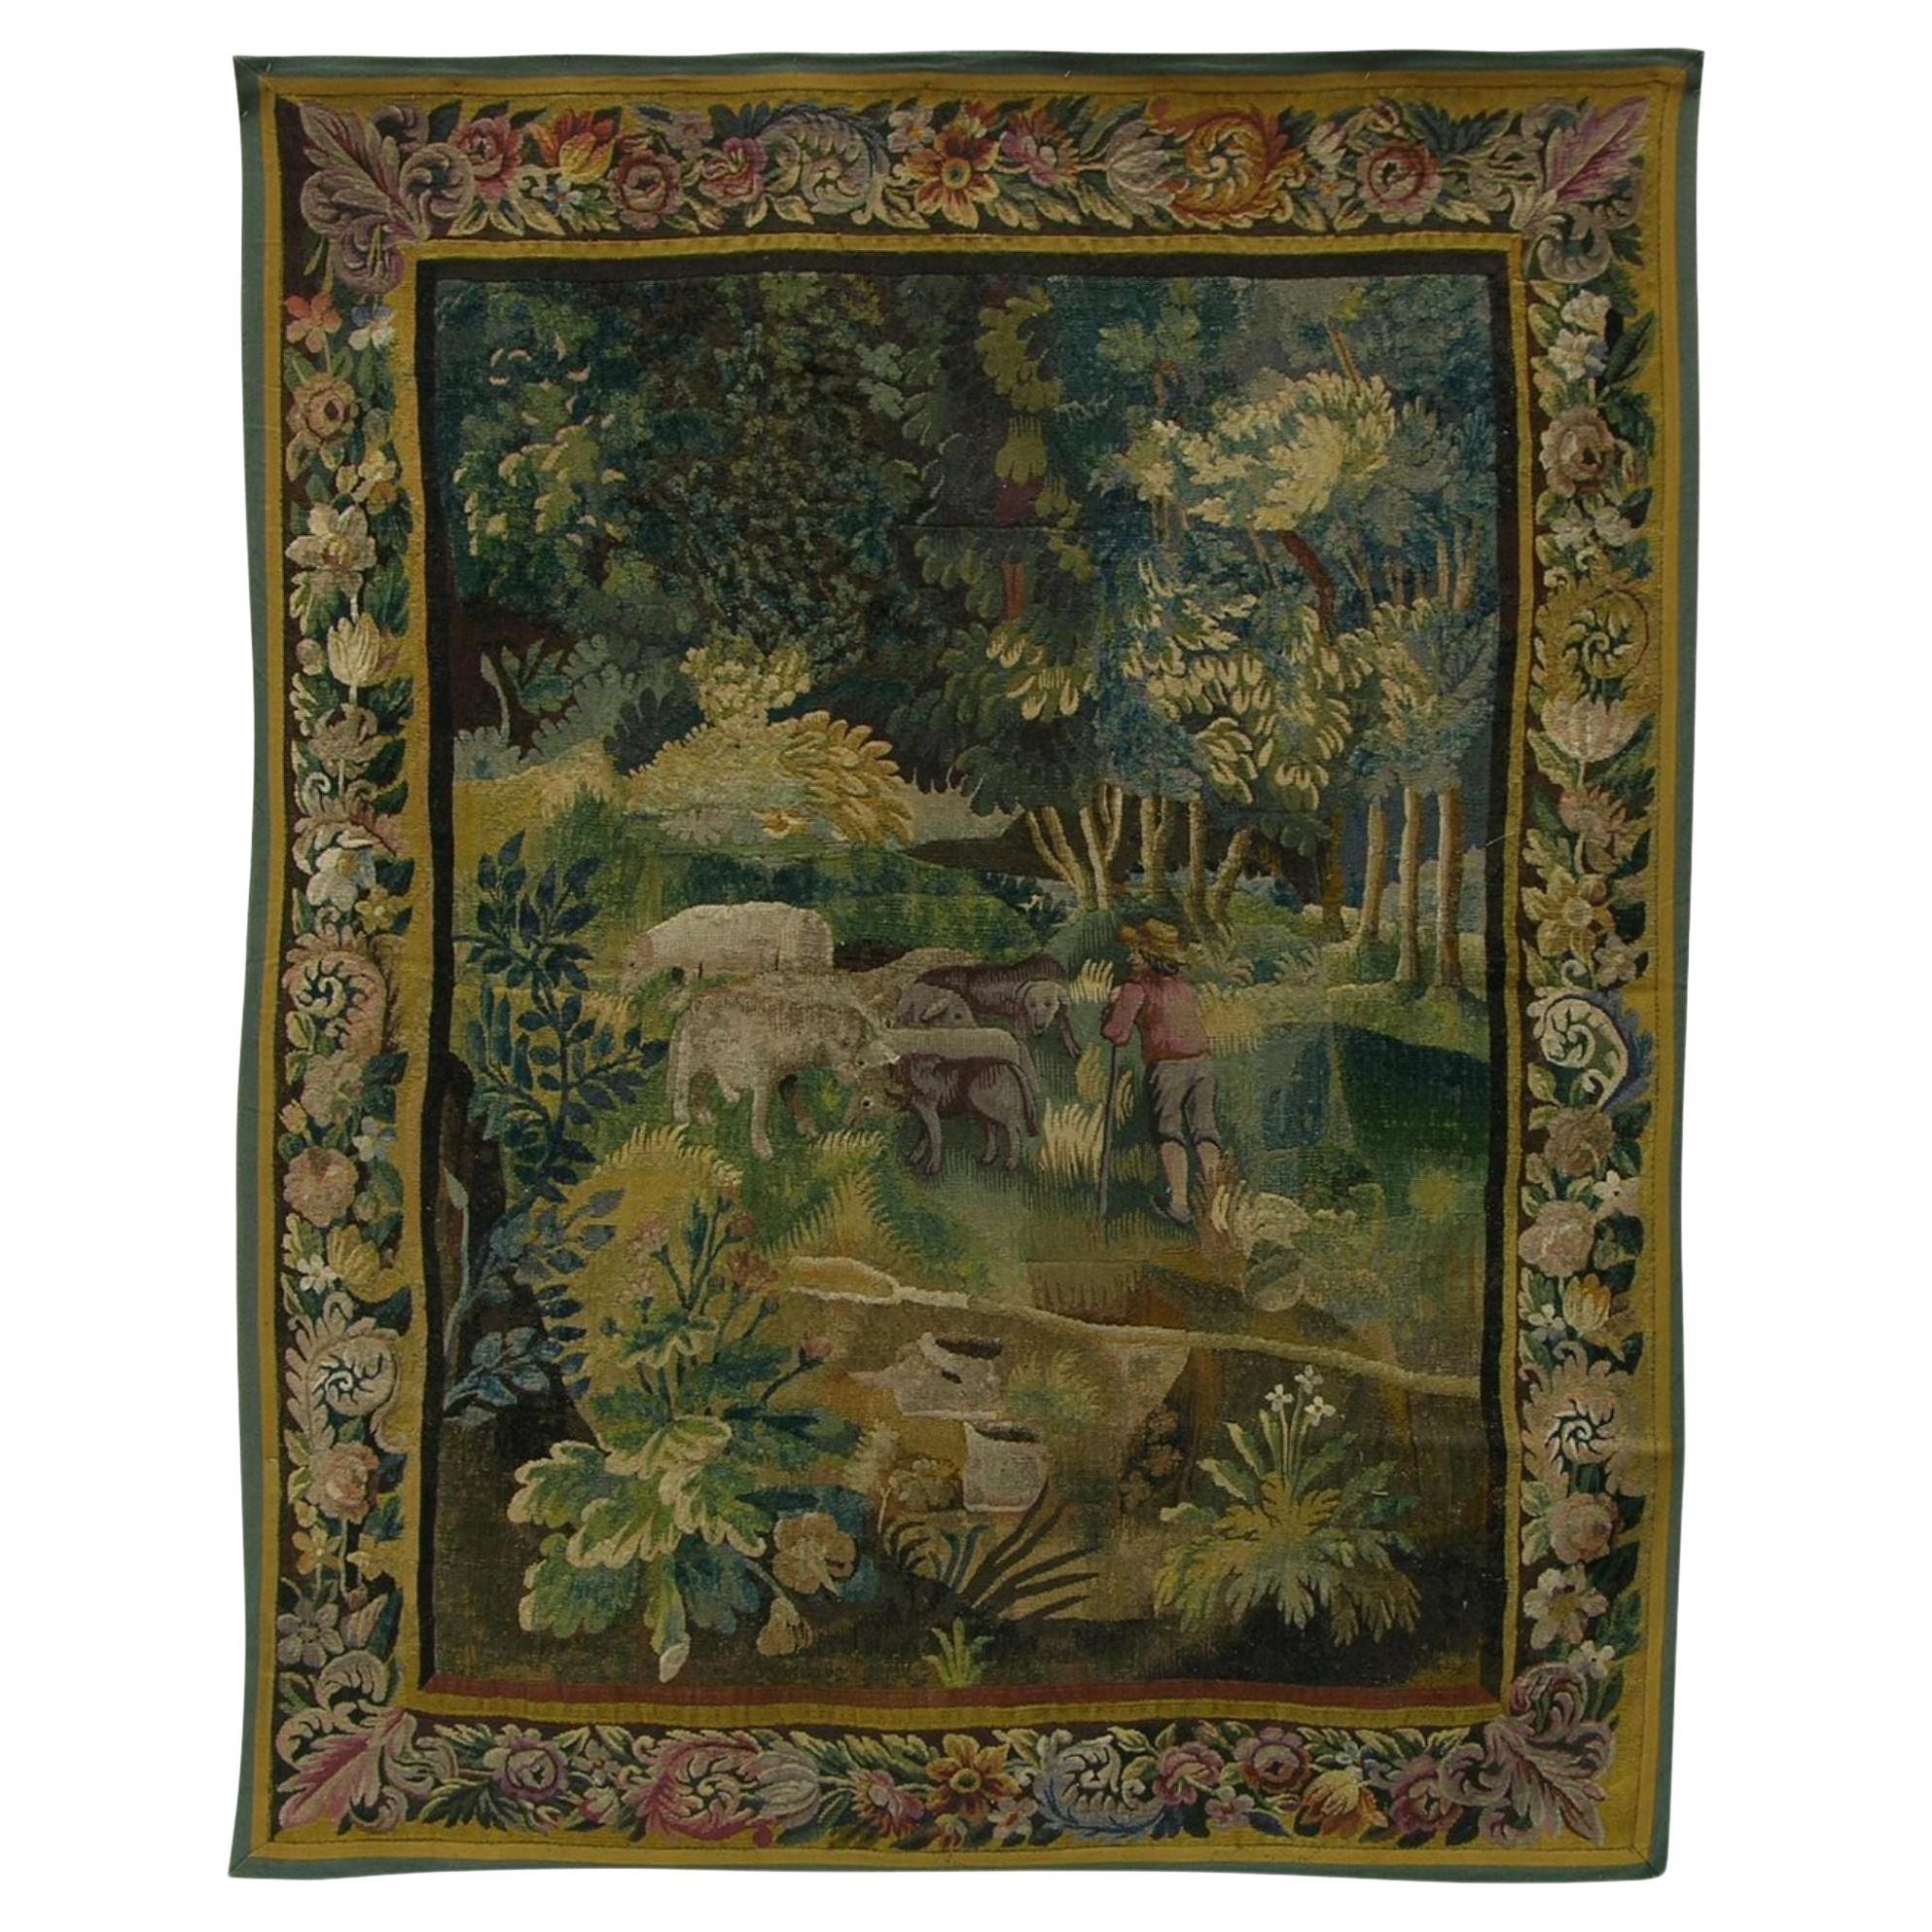 17th Century Antique Flemish Tapestry 7'4"" X 5'10" For Sale